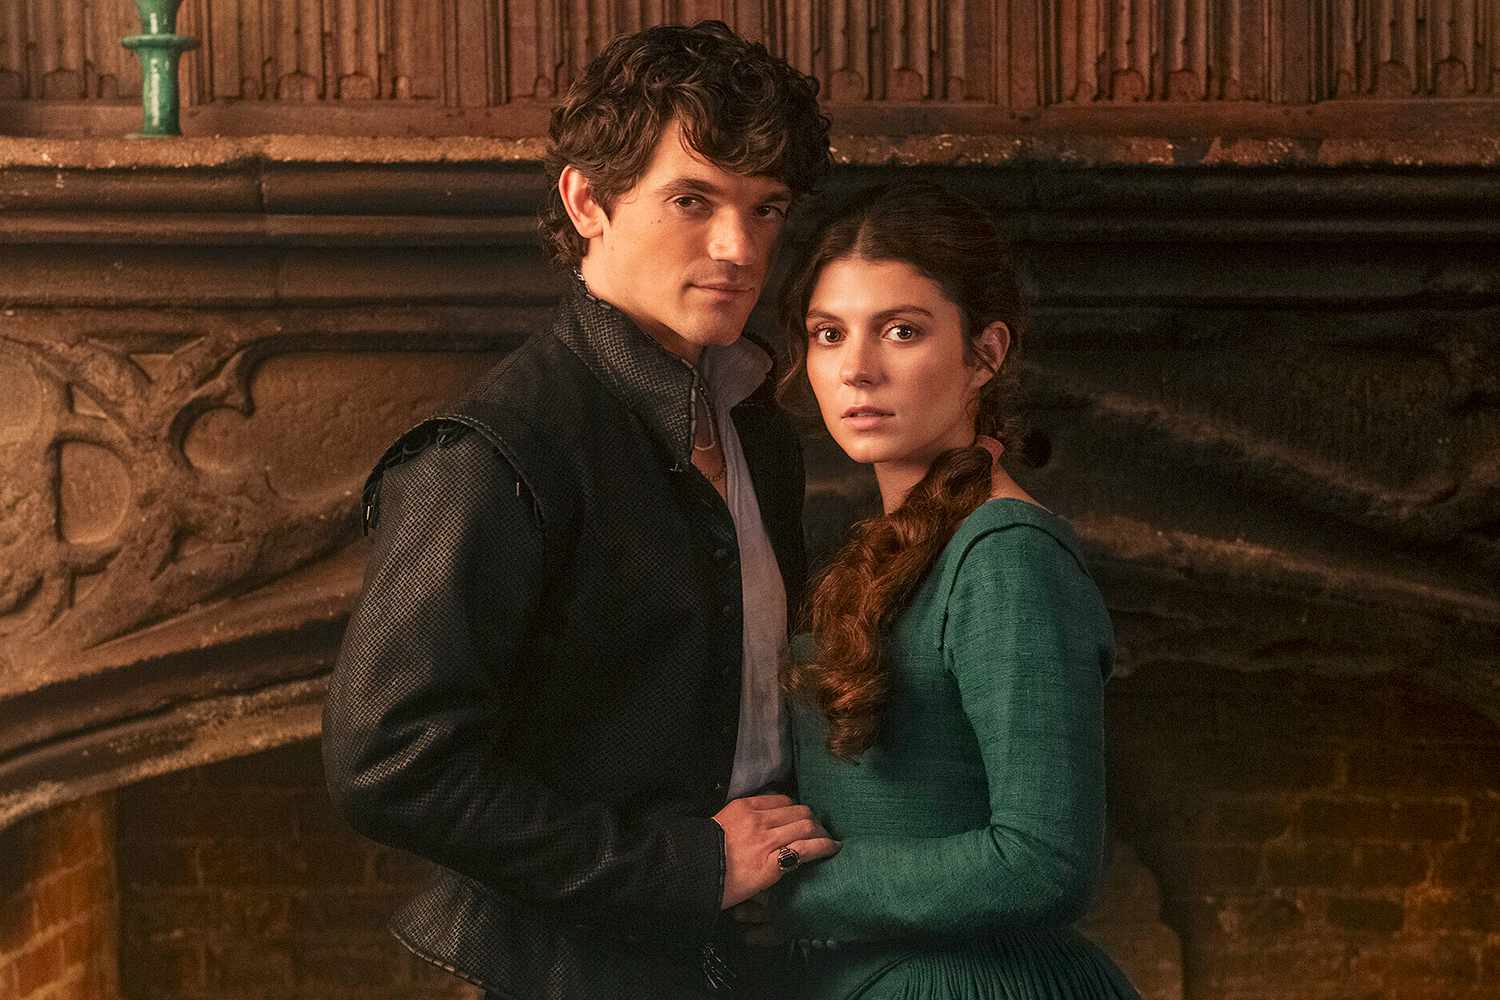 ...Jane's Emily Bader Says 'Brooding' Edward Bluemel Instantly Had the 'Snark and Charm' to Play Her Love Interest (Exclusive)